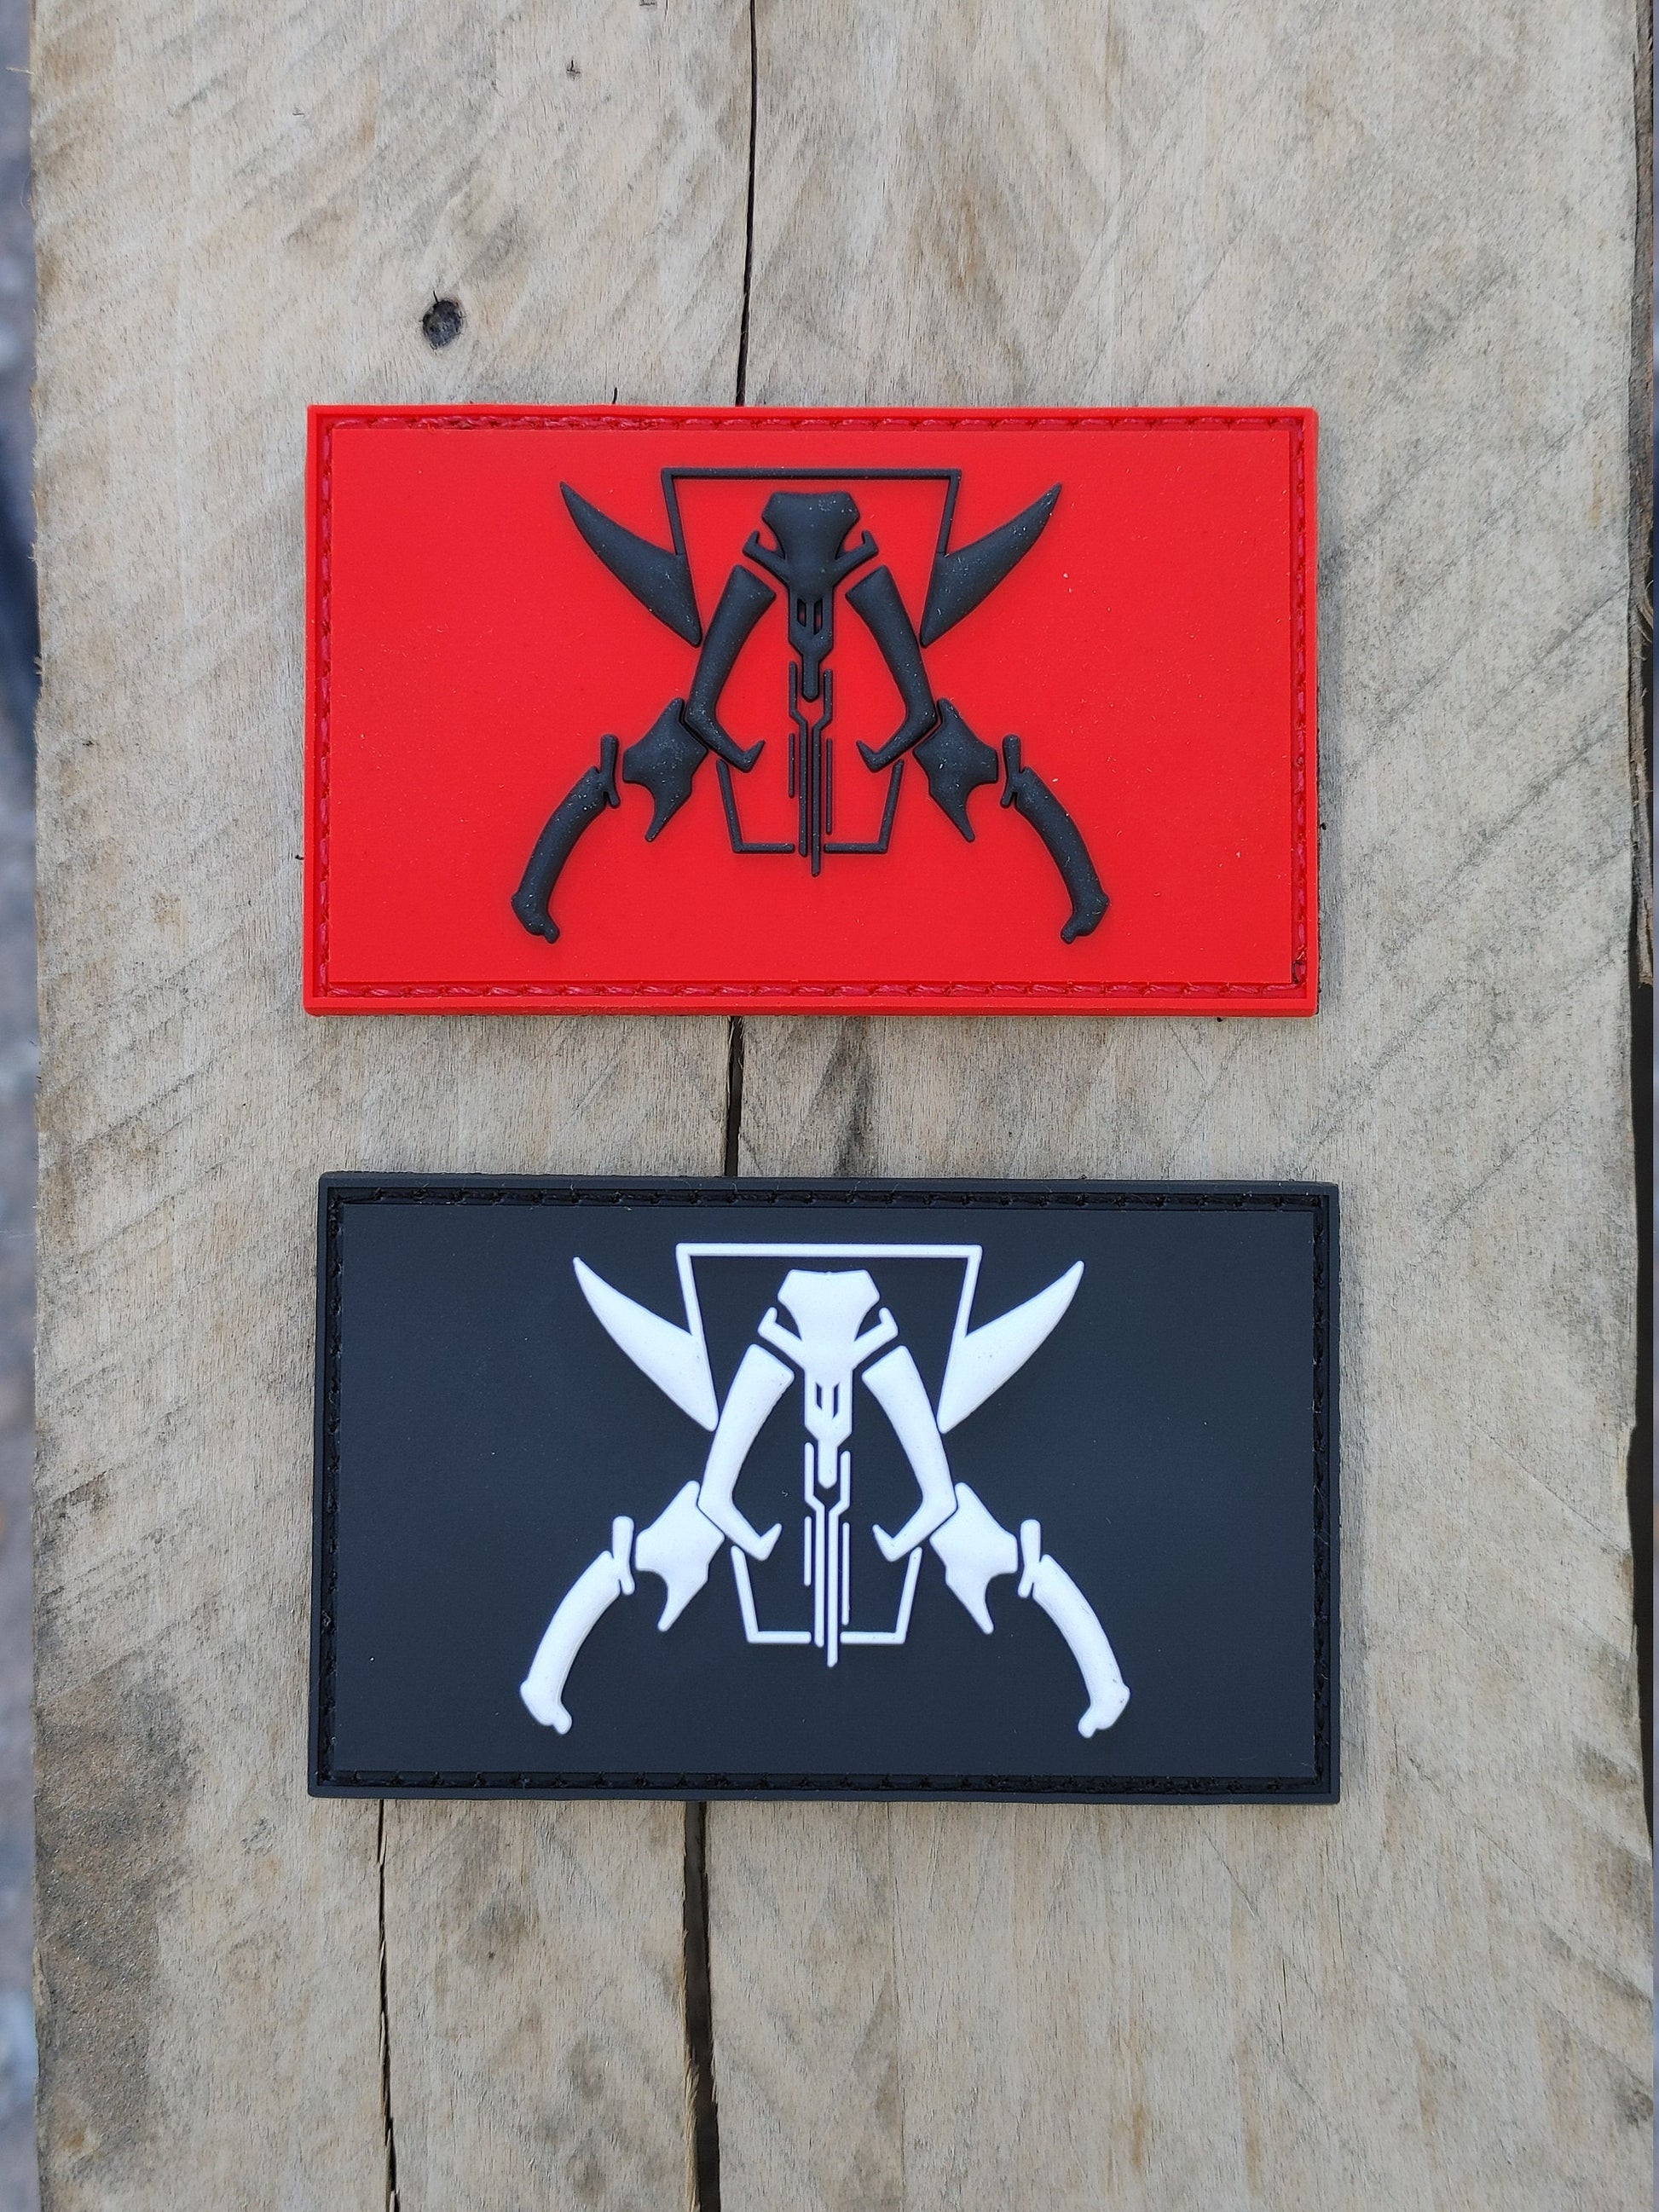 Jolly Mando - Mandalorian Jolly Roger Pirate Flag - Unique PVC Tactical Morale Patch - Star wars inspired Gift Mythosaur